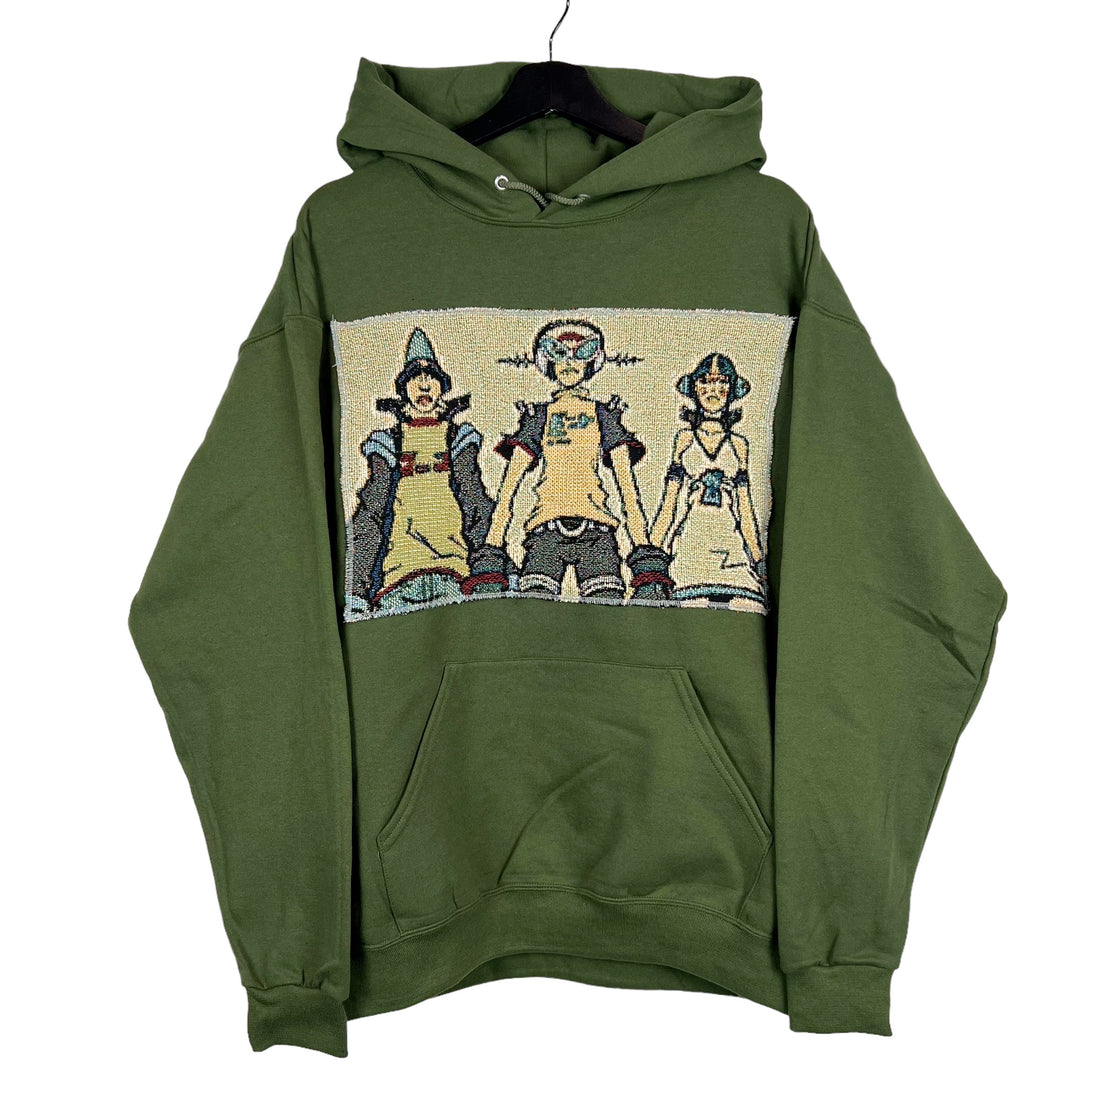 [PRE-ORDER] (Jet Set Radio) "The GG's" Patch Hoodie